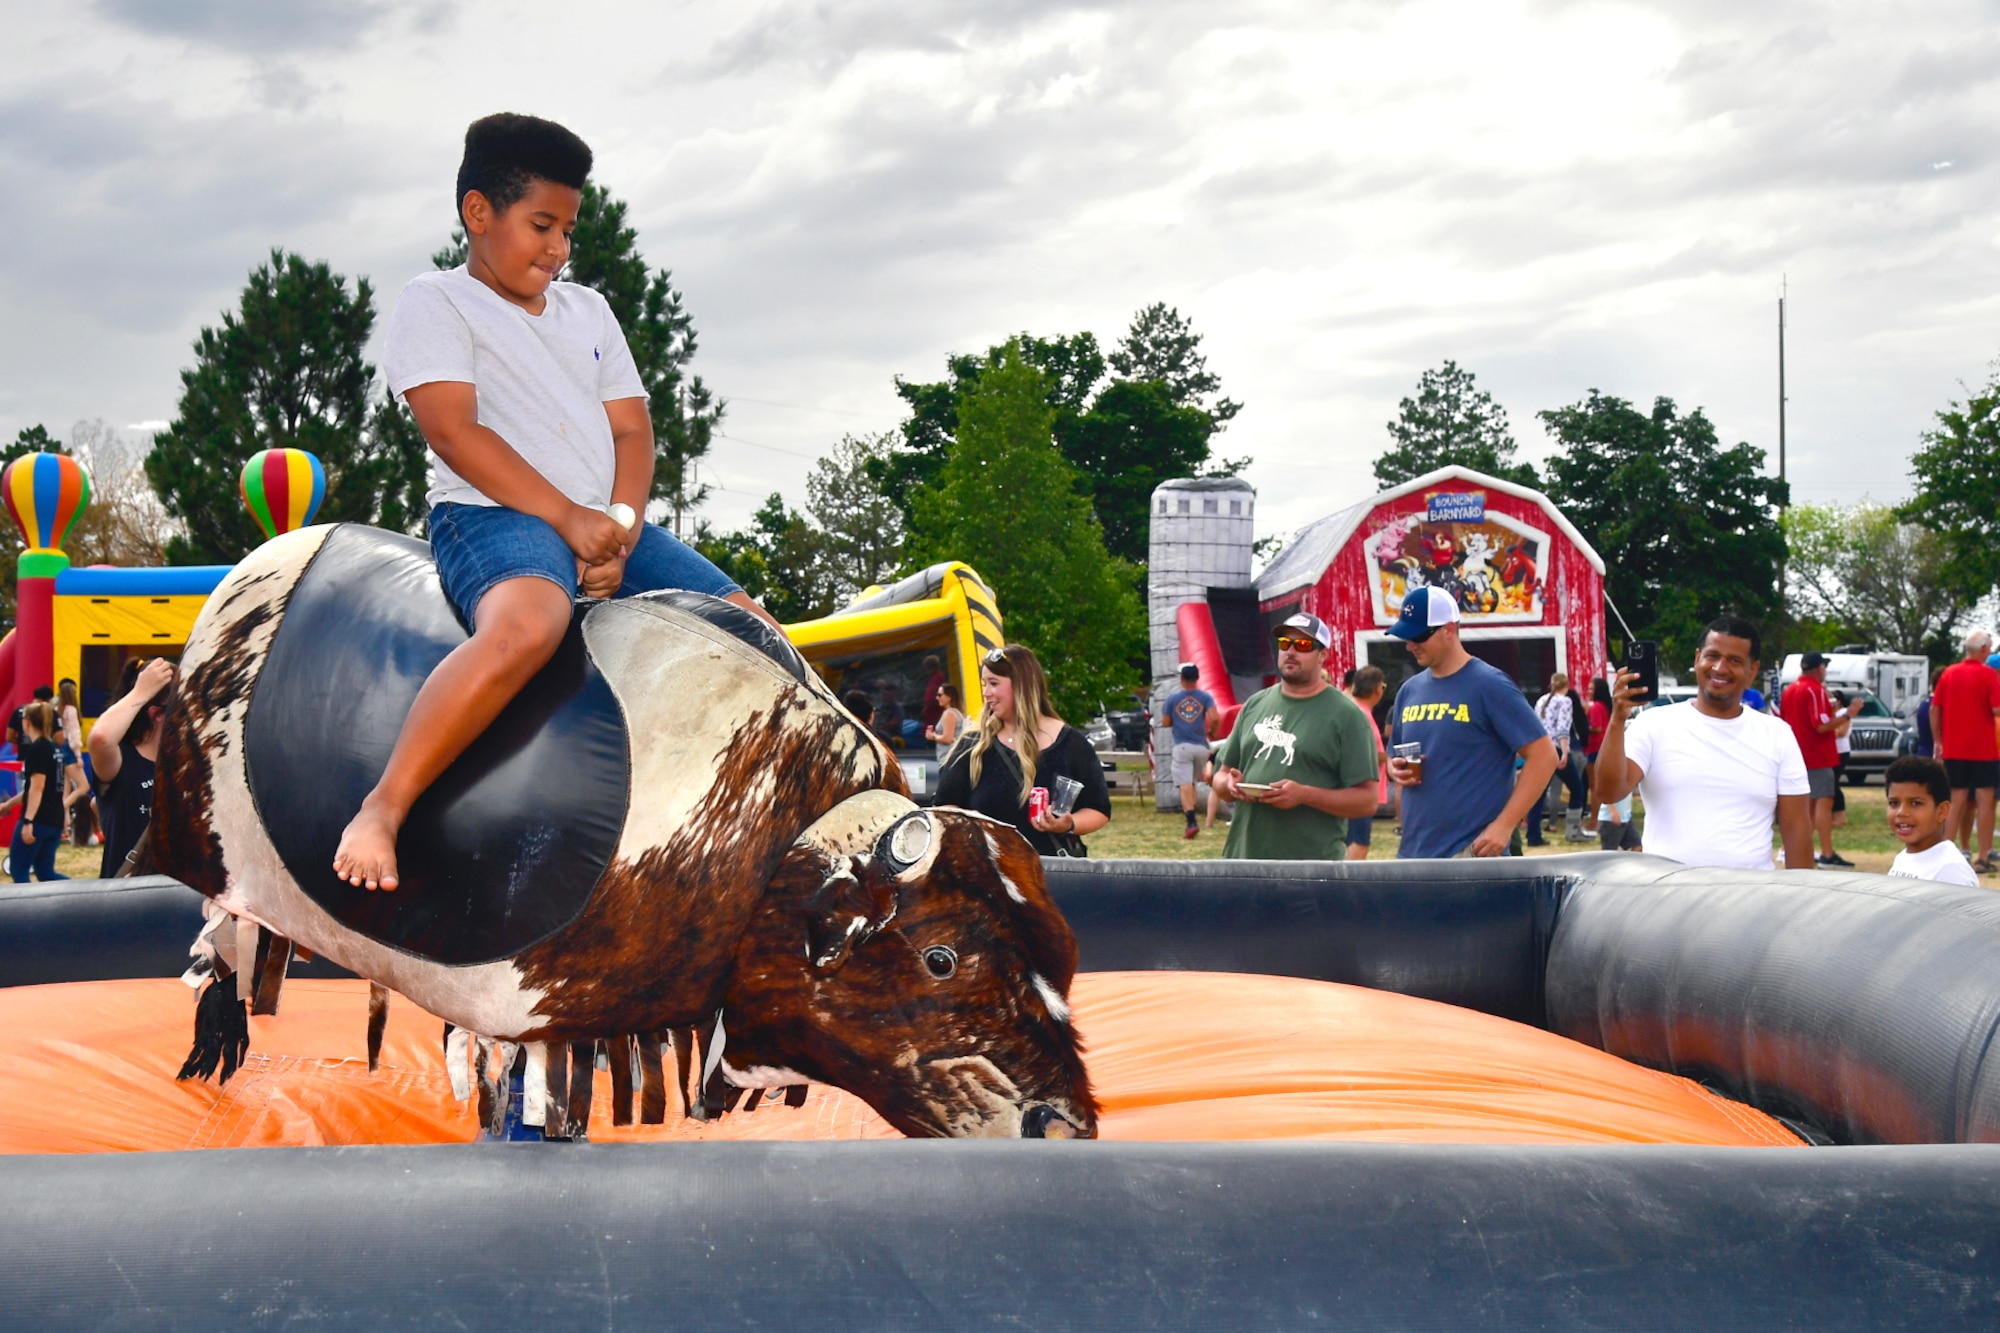 Visitor Evan Reynoso takes a turn on the mechanical bull during the Military Salute Picnic held at Centennial Park Aug. 5, 2022, at Hill Air Force Base, Utah. The annual event is sponsored by the Top of Utah Military Affairs Committee and provided fun activities, free food and live entertainment for the base’s military and their families. (U.S. Air Force photo by Todd Cromar)